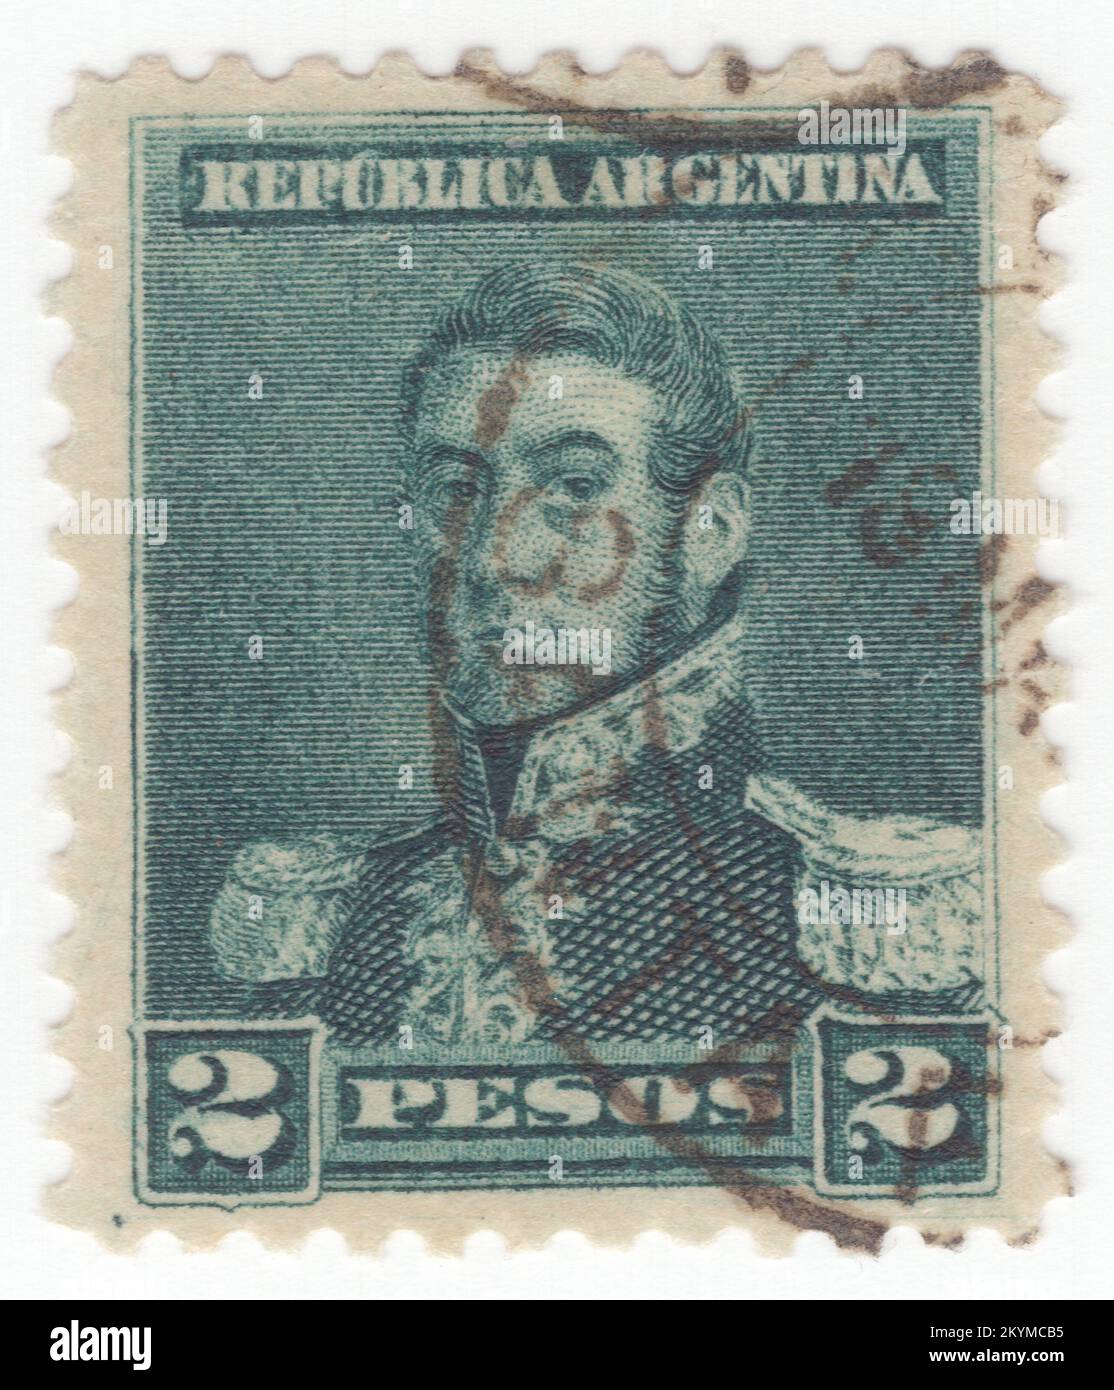 ARGENTINA - 1892: 2 pesos dark green postage stamp depicting portrait of José de San Martín (Jose Francisco de San Martín y Matorras), known as the Liberator of Argentina, Chile and Peru. Argentine general and the primary leader of the southern and central parts of South America's successful struggle for independence from the Spanish Empire who served as the Protector of Peru. Born in Yapeyú, Corrientes, in modern-day Argentina, he left the Viceroyalty of the Río de la Plata at the early age of seven to study in Málaga, Spain Stock Photo